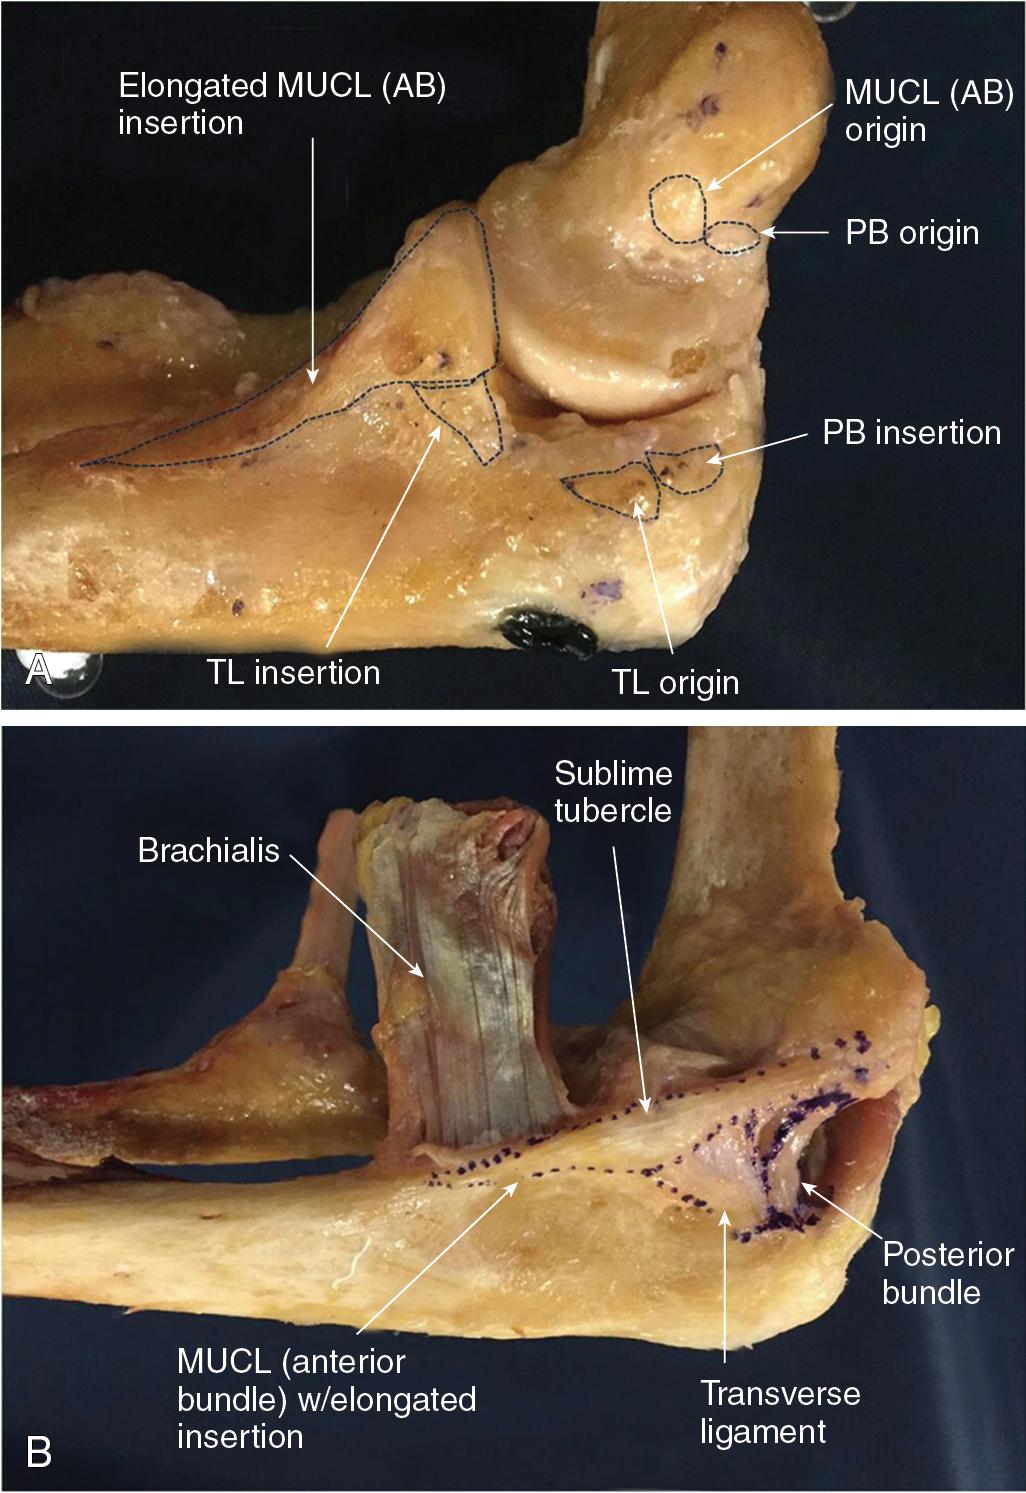 Fig. 42.6, Cadaveric specimen showing origins and insertions of all components of medial ulnar collateral ligament complex (A). Ligaments are intact on medial elbow (B). AB, Anterior bundle; MUCL , medial ulnar collateral ligament; PB , posterior bundle; TL , transverse ligament.